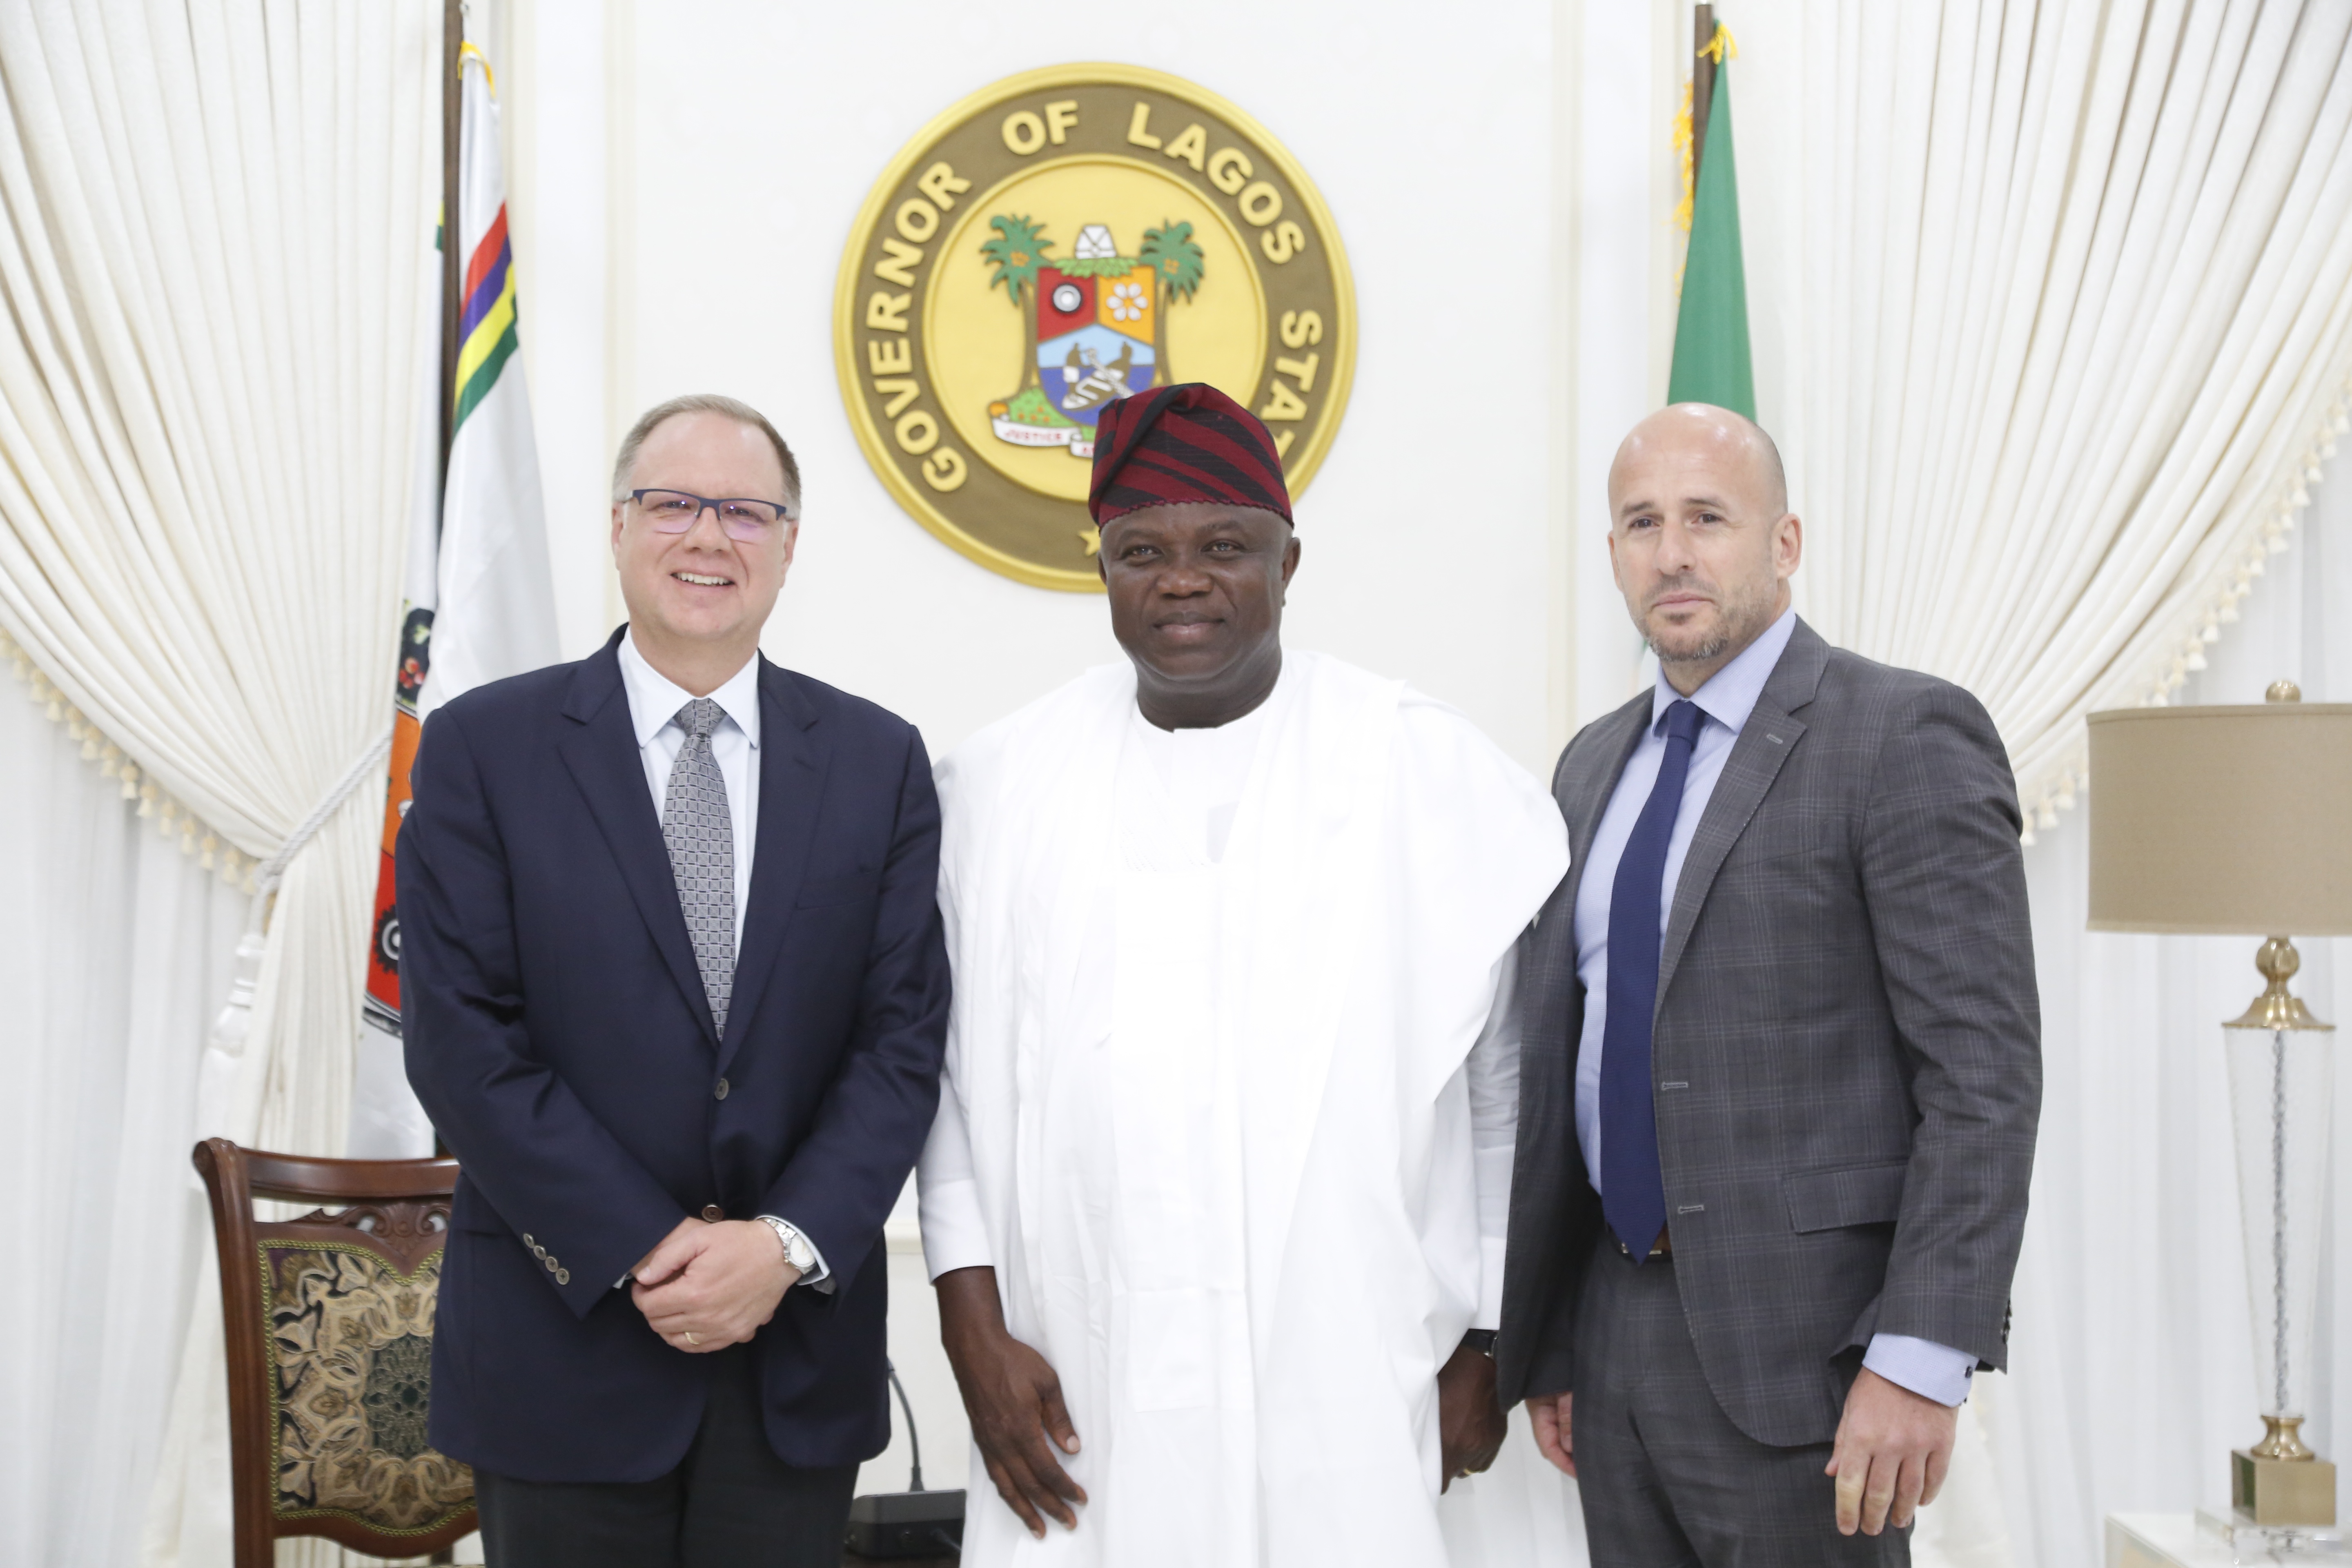 Lagos State Governor, Mr. Akinwunmi Ambode (middle), flanked by the High Commissioner of Canada to Nigeria, Mr. Christopher Thornley (left) and his Deputy, Mr. James  Christoff (right) during the Canadian High Commissioner’s courtesy visit at the Governor’s residence in Epe, on Thursday, January 25, 2018.